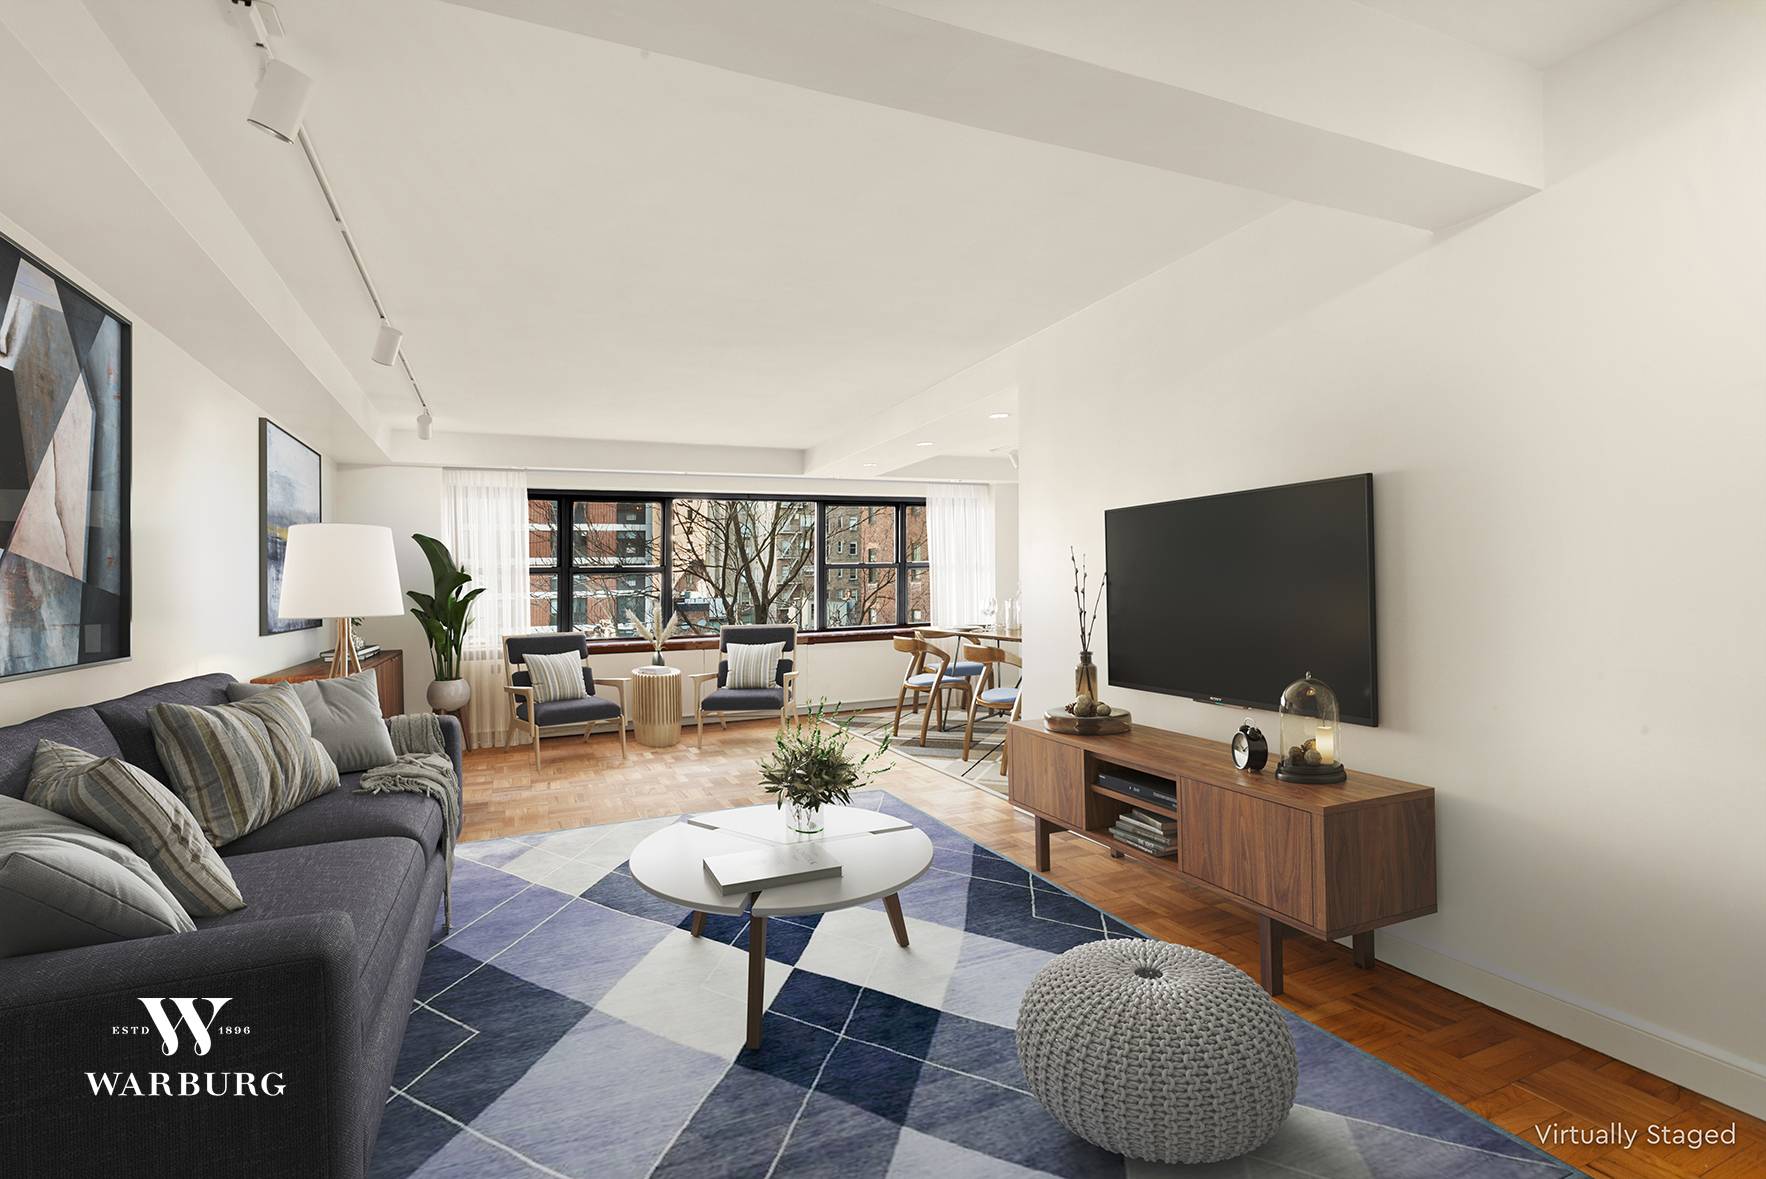 Create your dream home in one of Manhattan's most desirable neighborhoods, one block from Central Park !